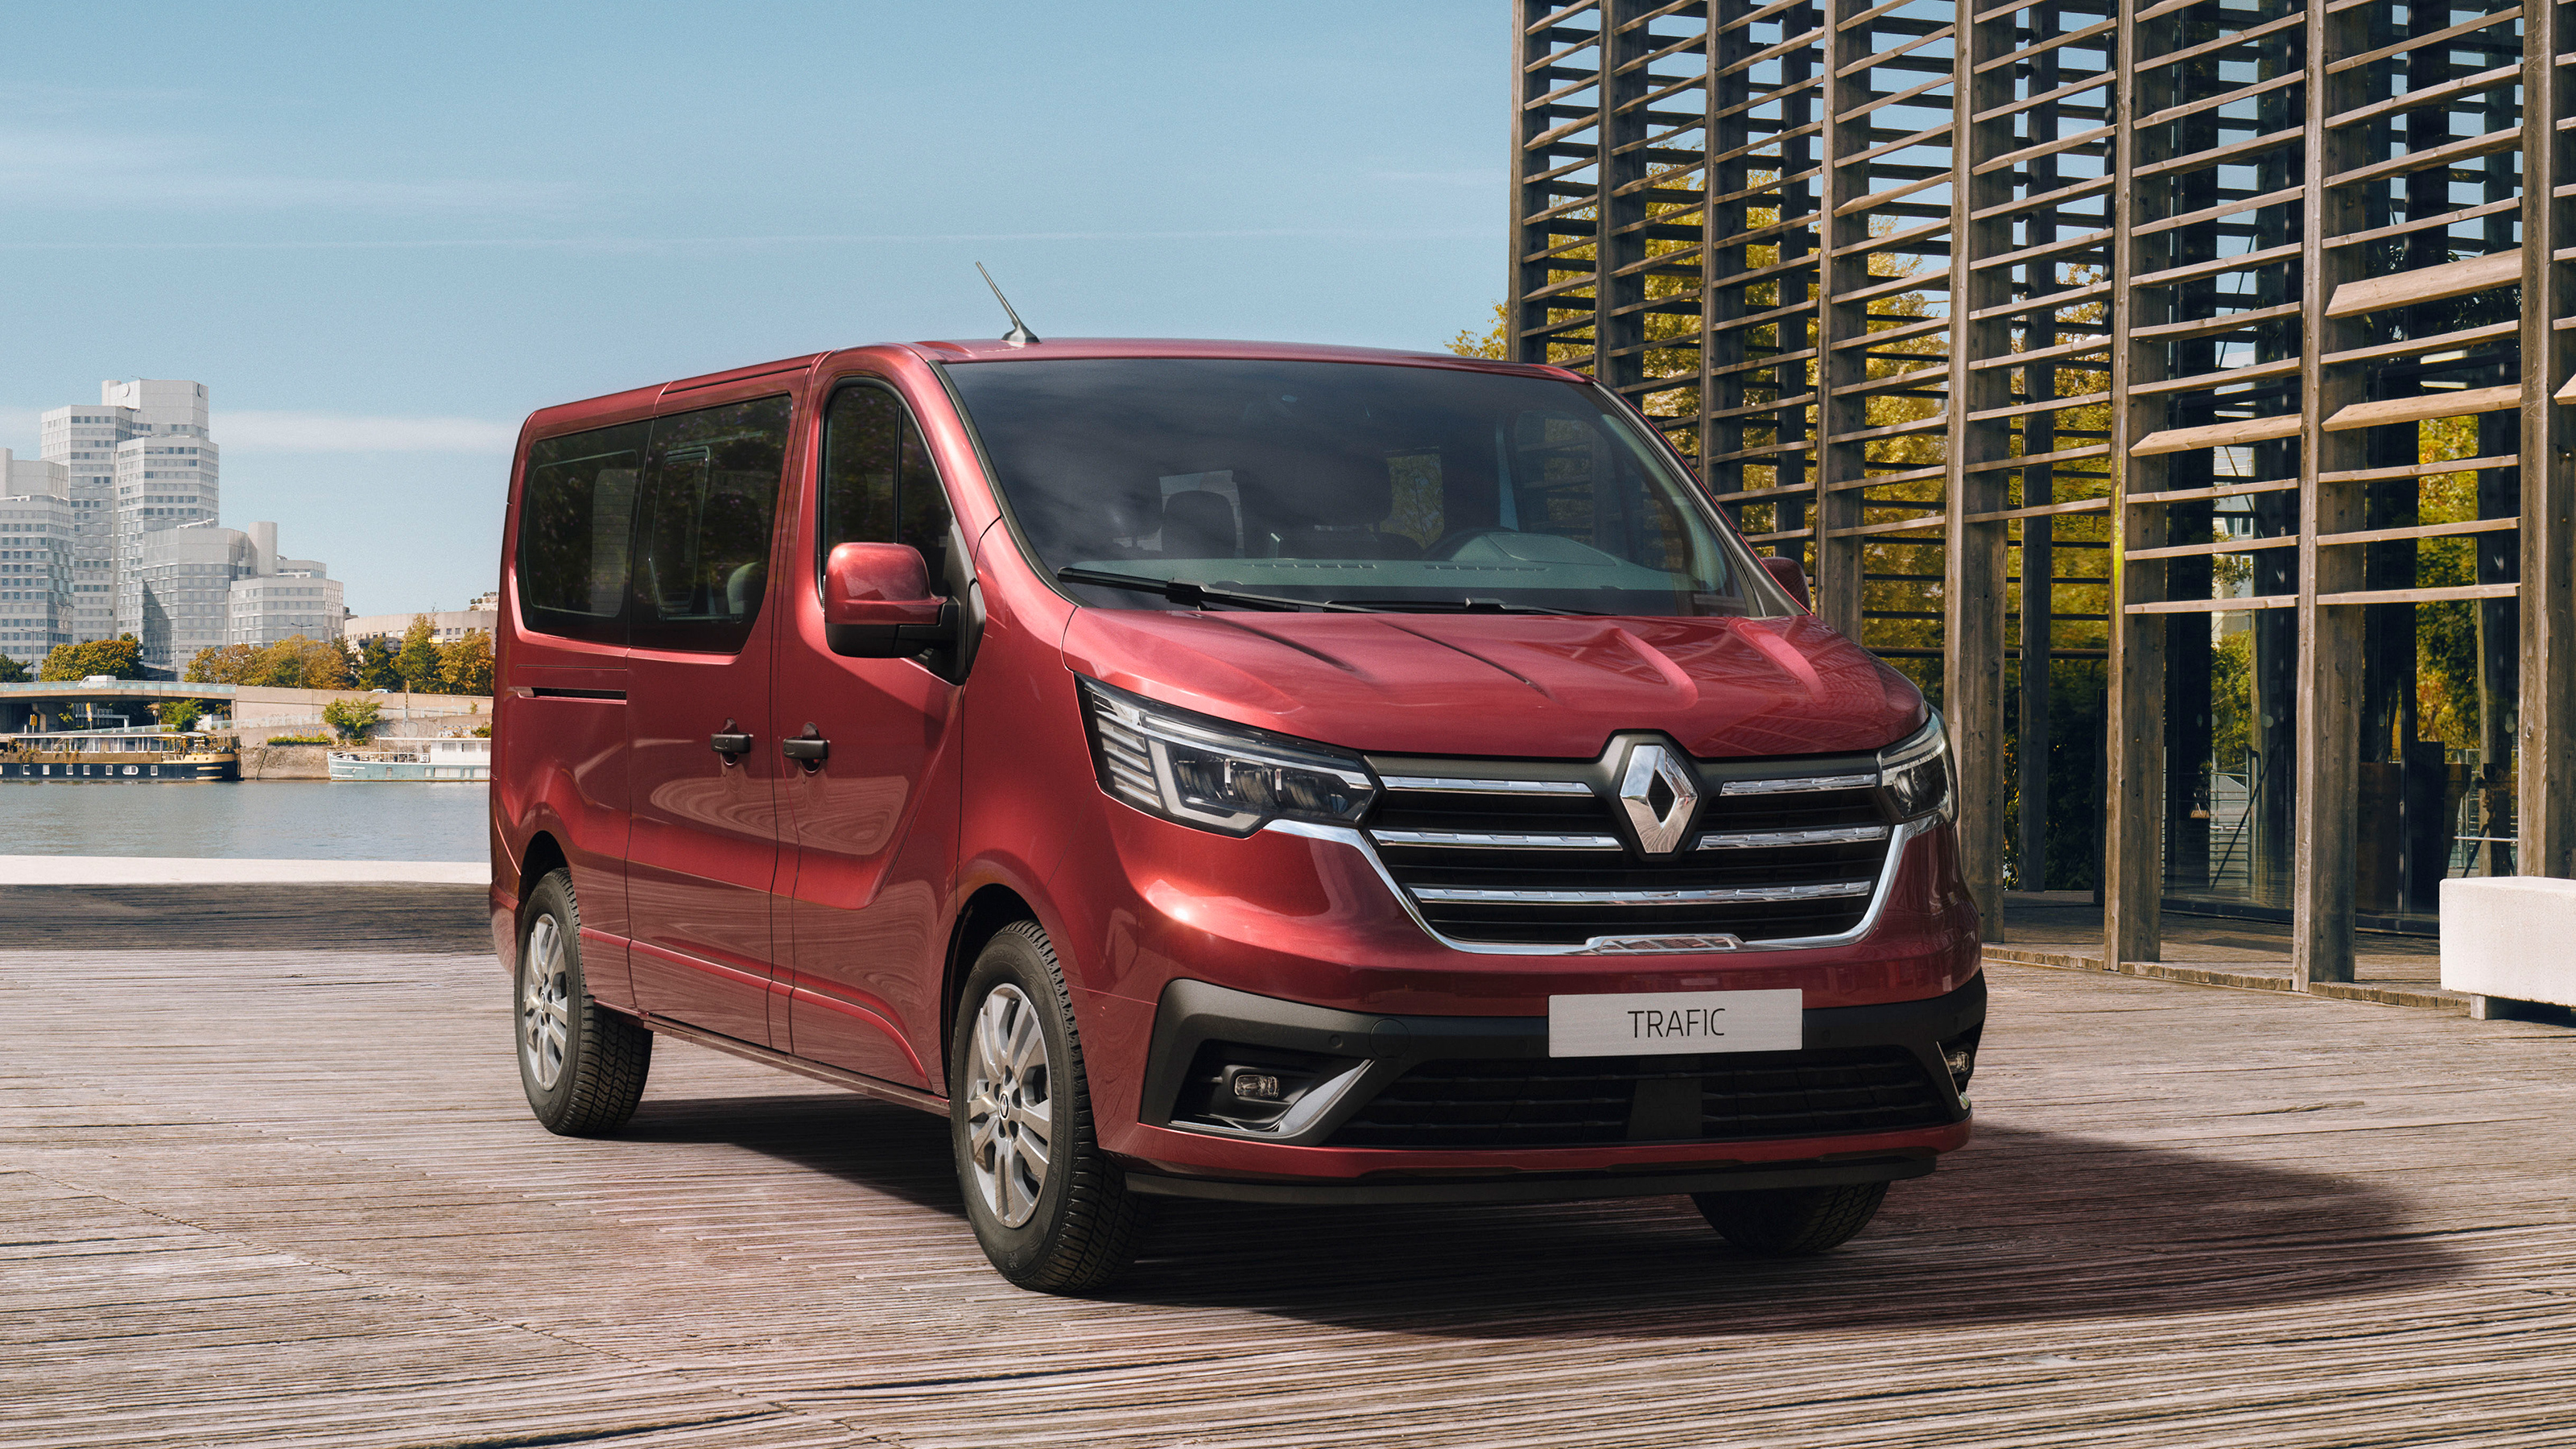 Updated Renault Trafic Passenger and SpaceClass unveiled